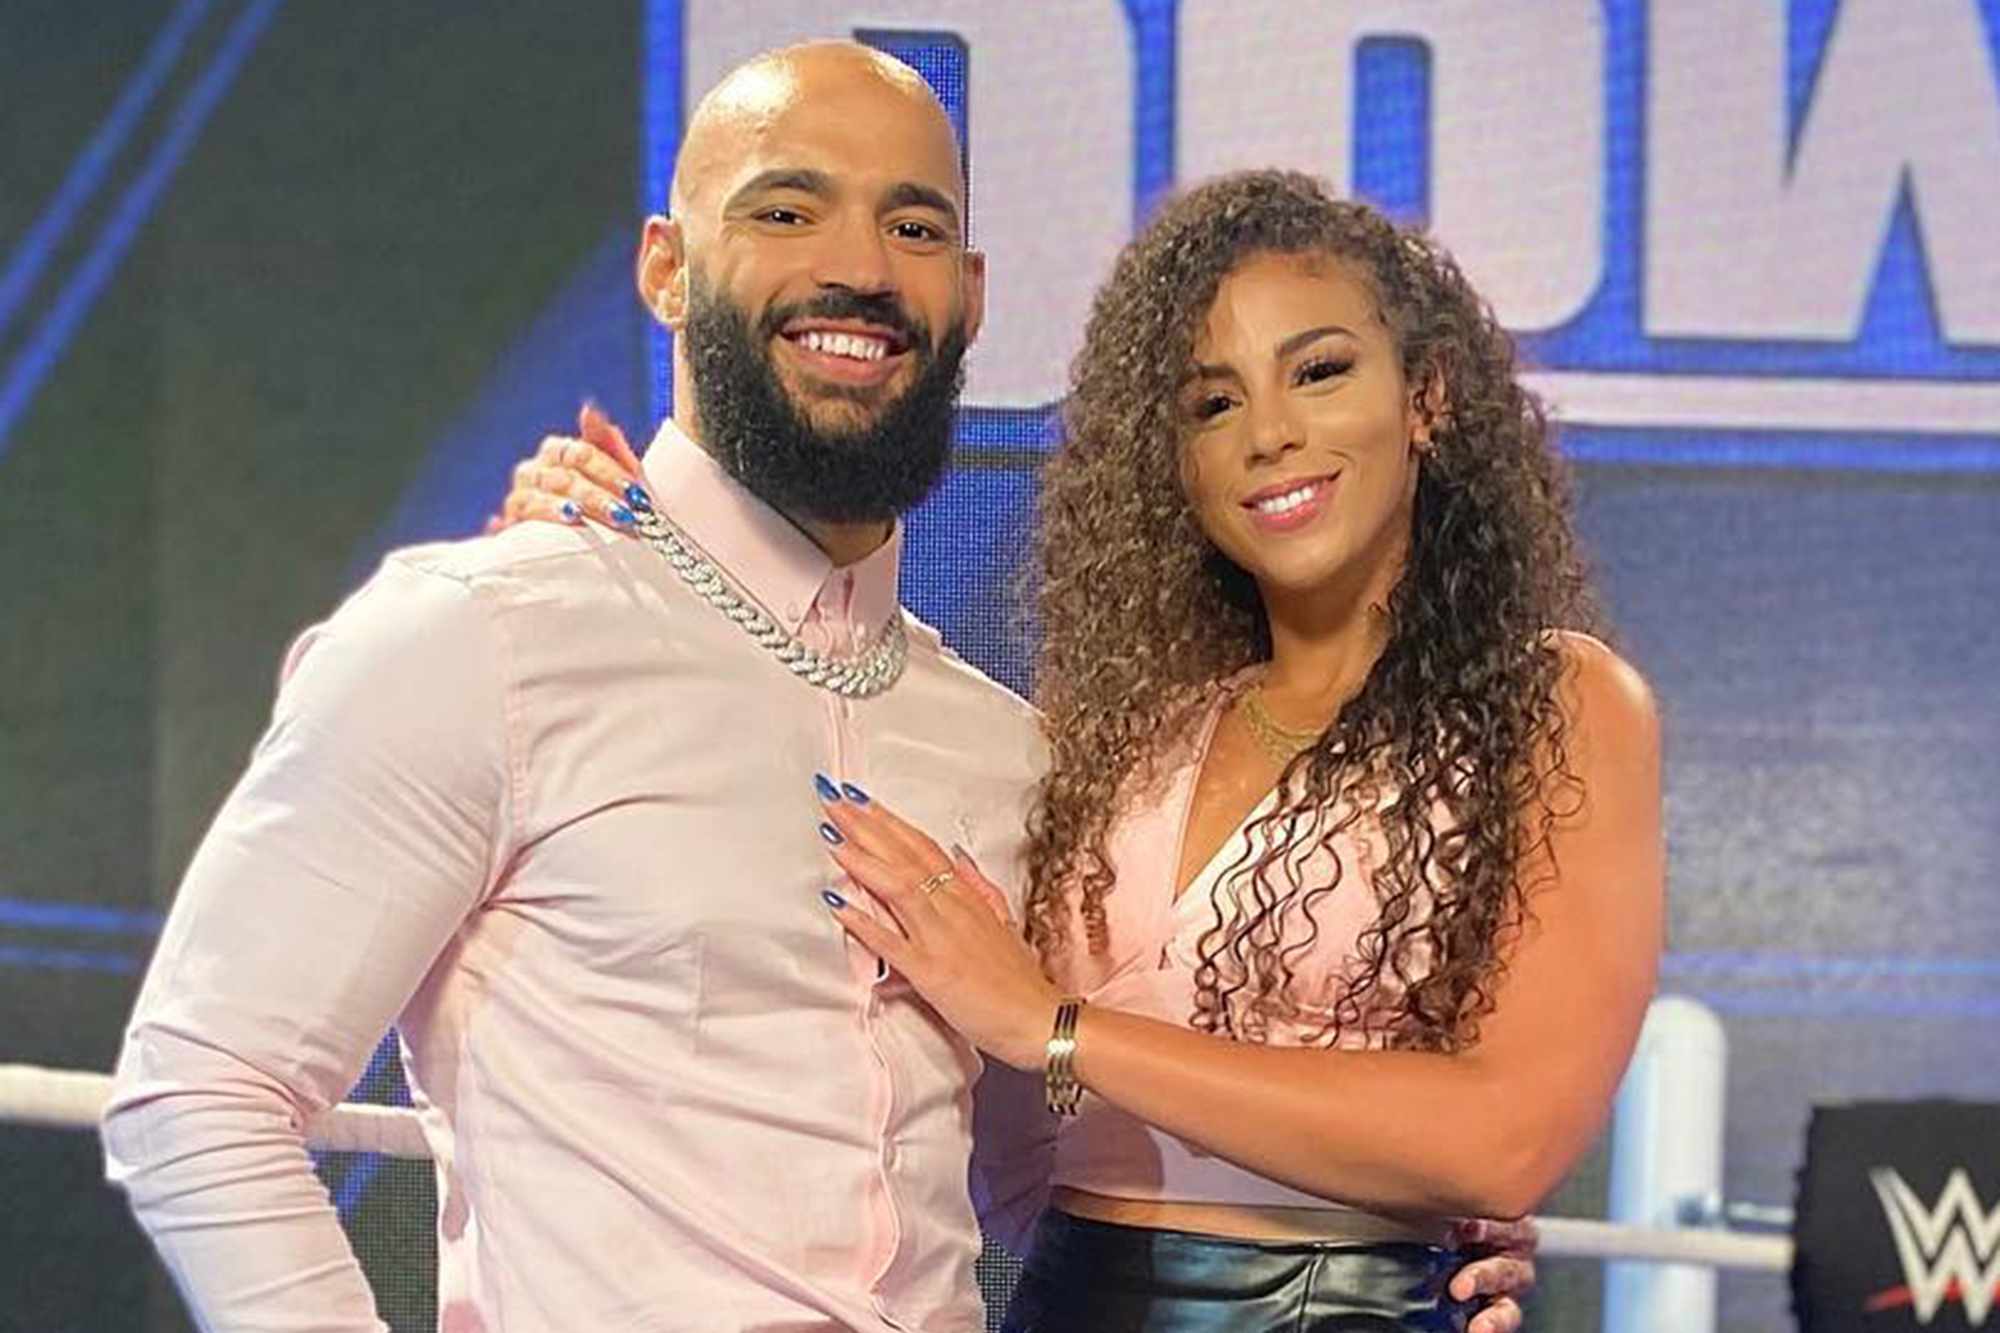 Samantha Irvin and Ricochet: All About the WWE Star and Ring Announcer's Relationship